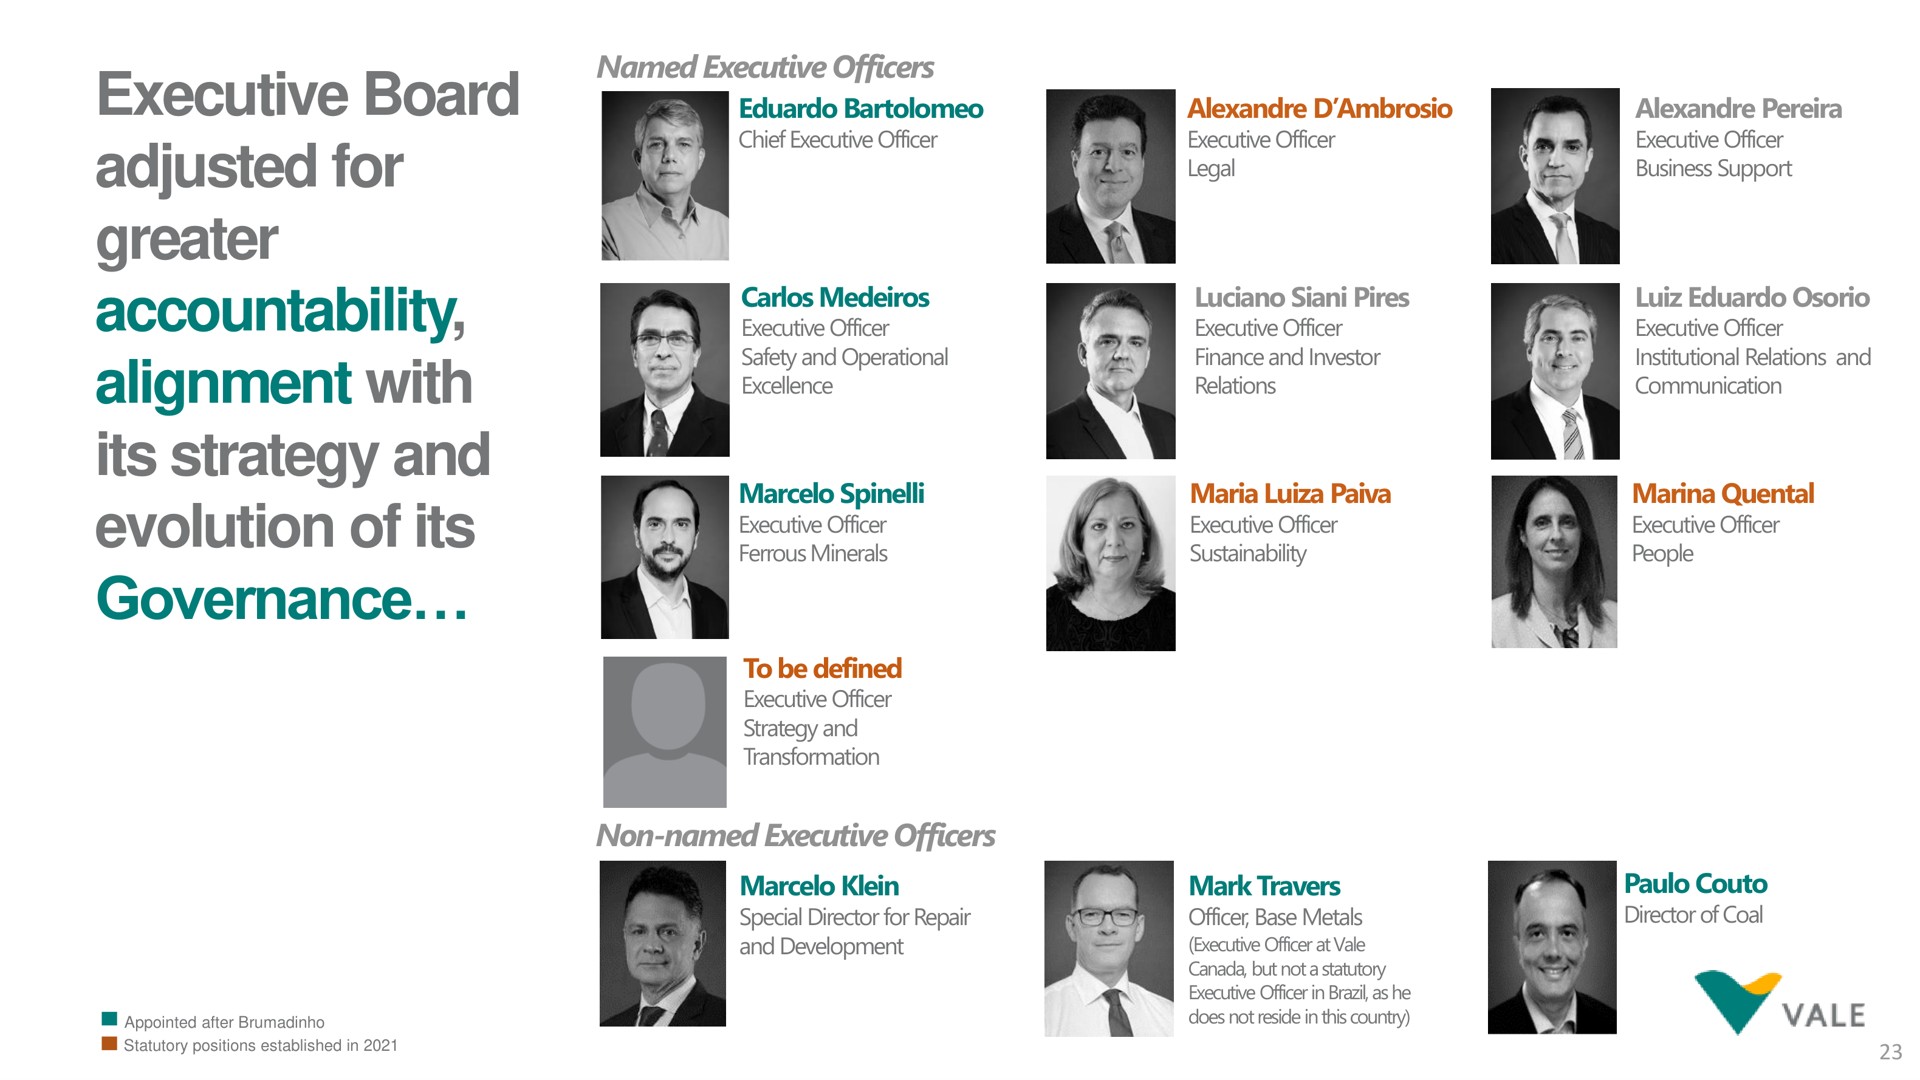 executive board adjusted for greater accountability alignment with its strategy and evolution of its governance vat | Vale